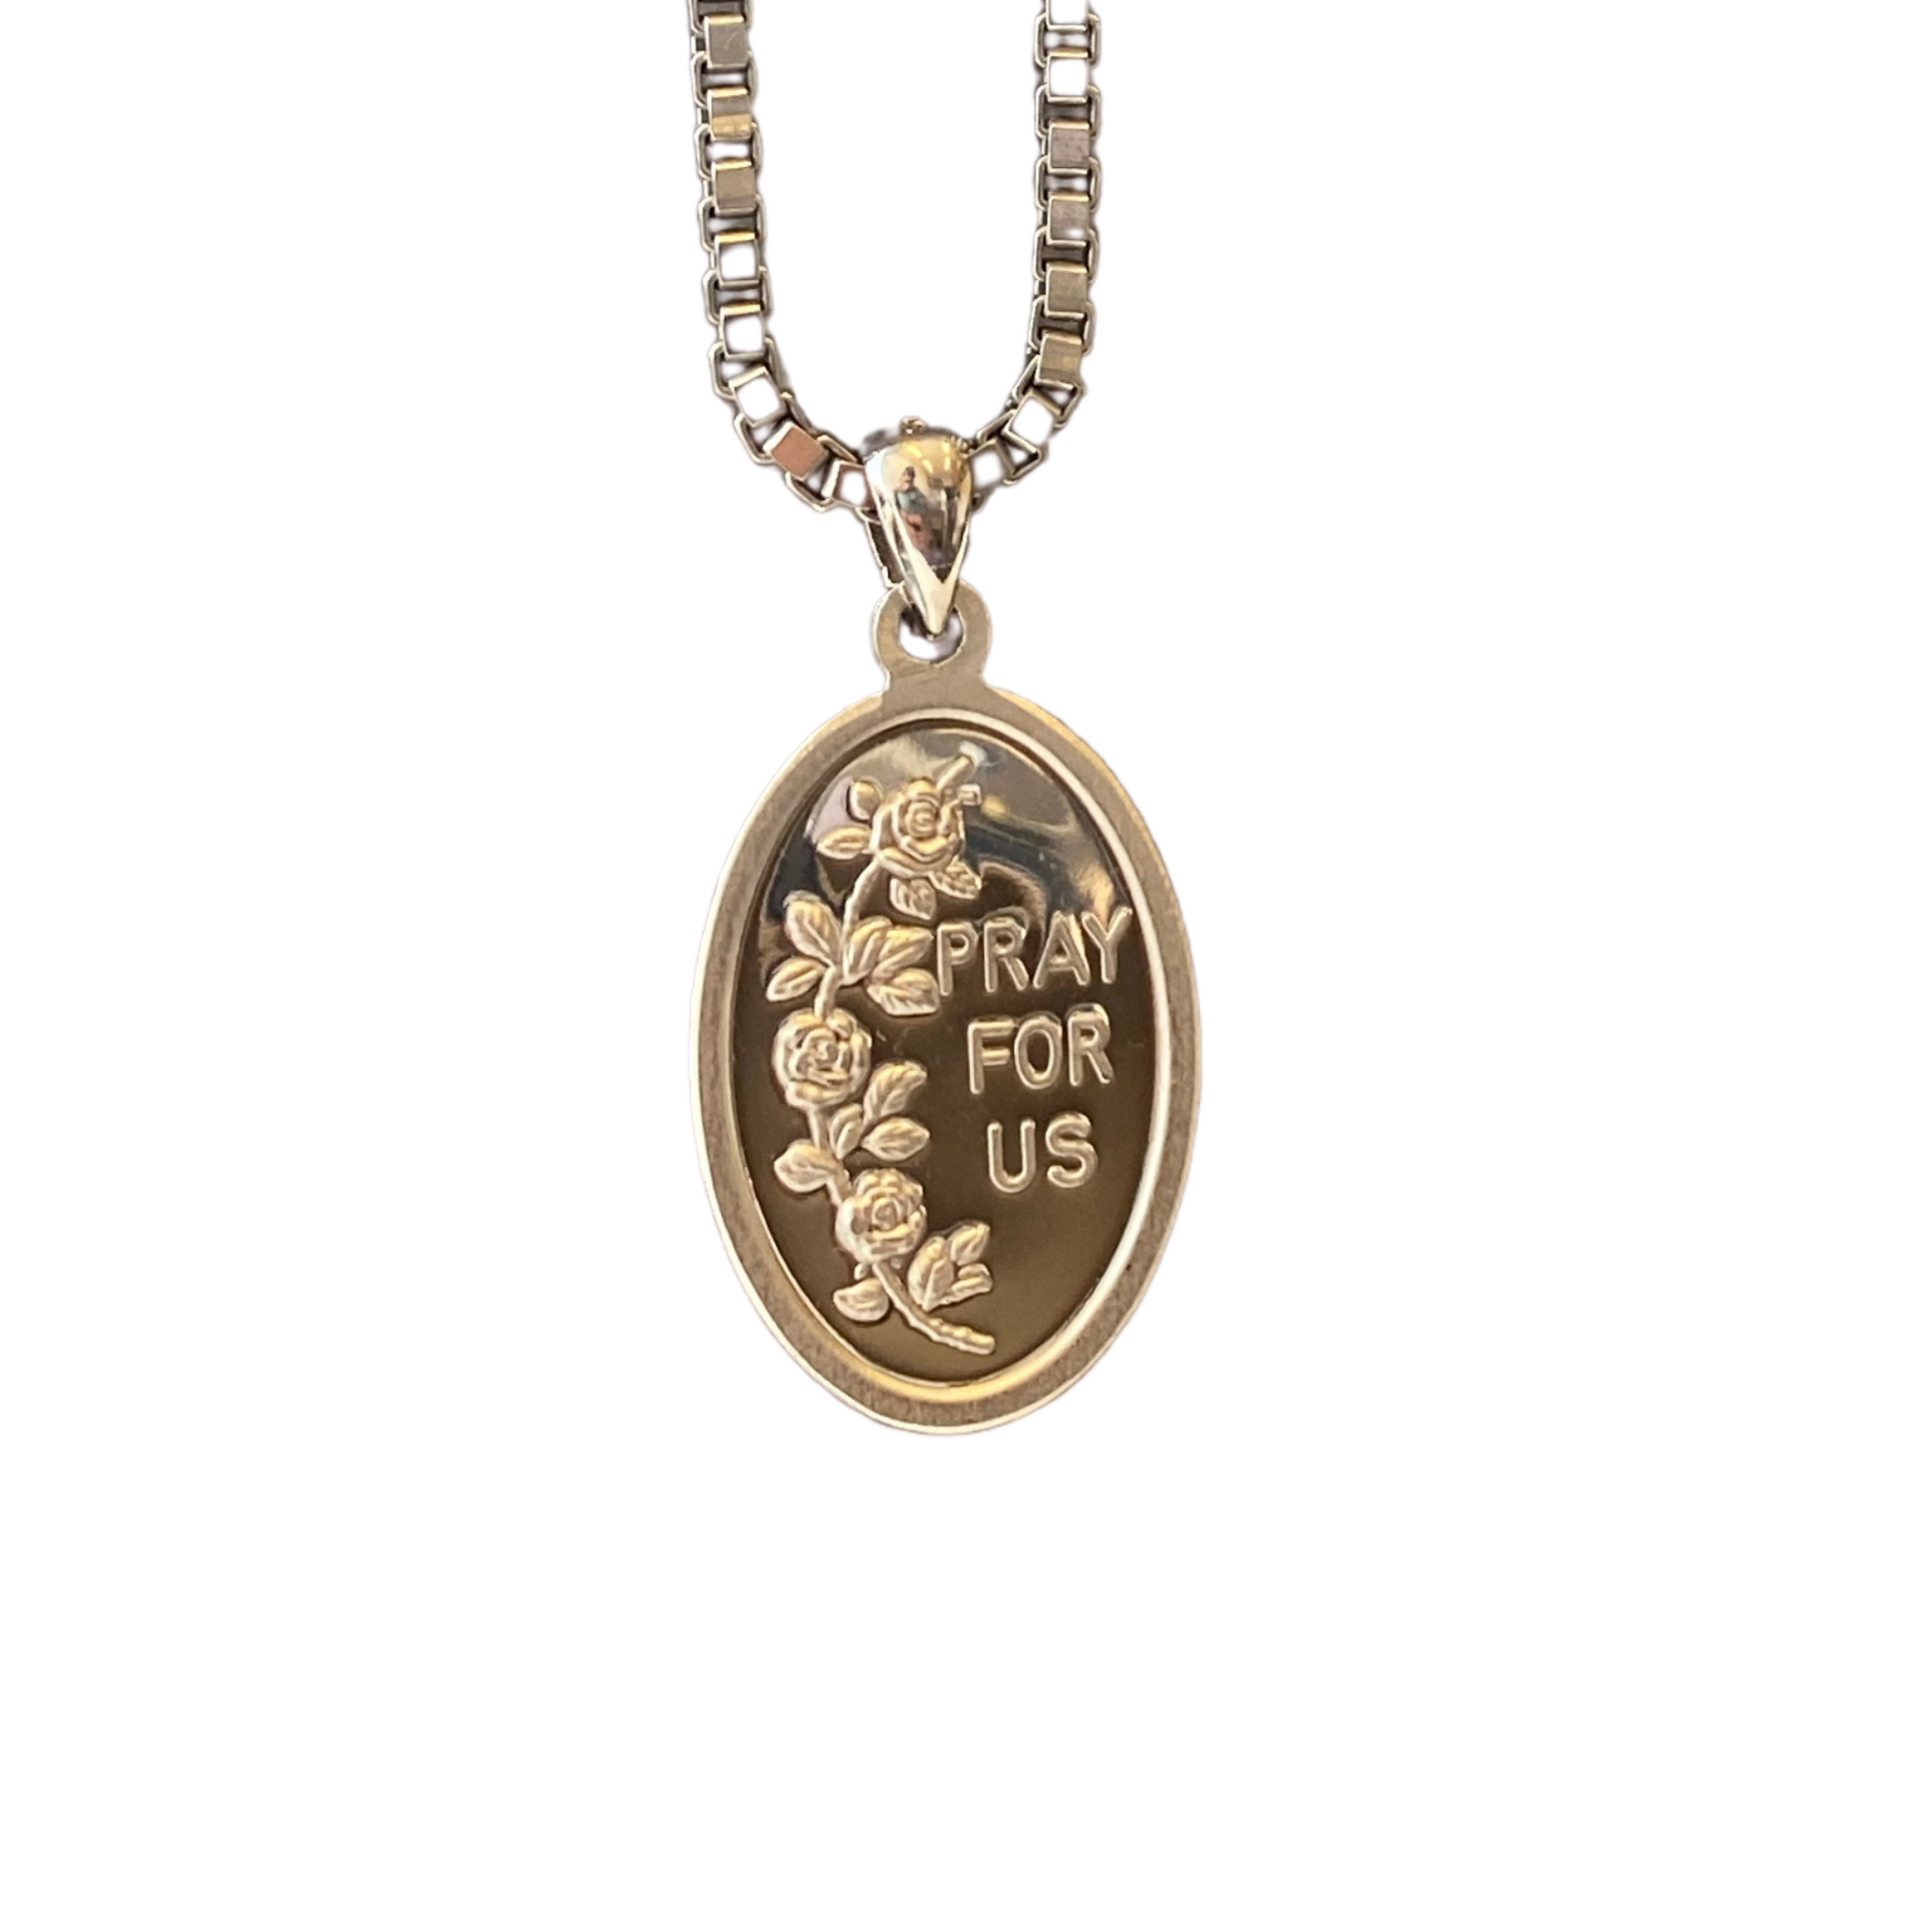 pray for us pendant + necklace